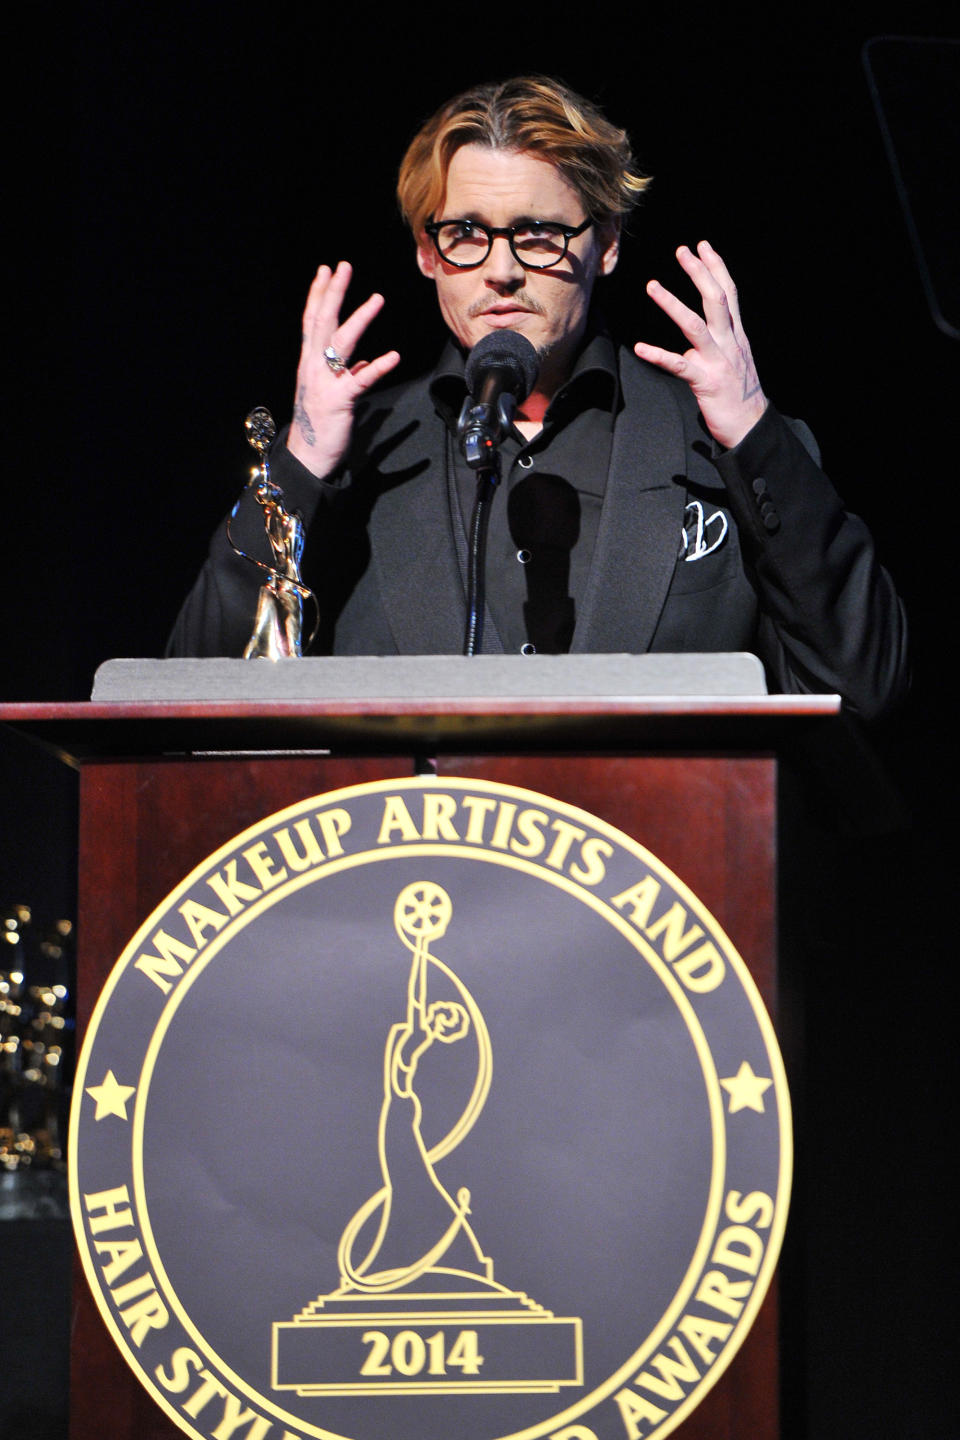 Actor Johnny Depp speaks after accepting the Distinguished Artisan Award at The Make-Up Artists and Hair Stylists Guild Awards on Saturday, Feb. 15, 2014 at Paramount Studios in Los Angeles, California. (Photo by Vince Bucci/Invision/AP)